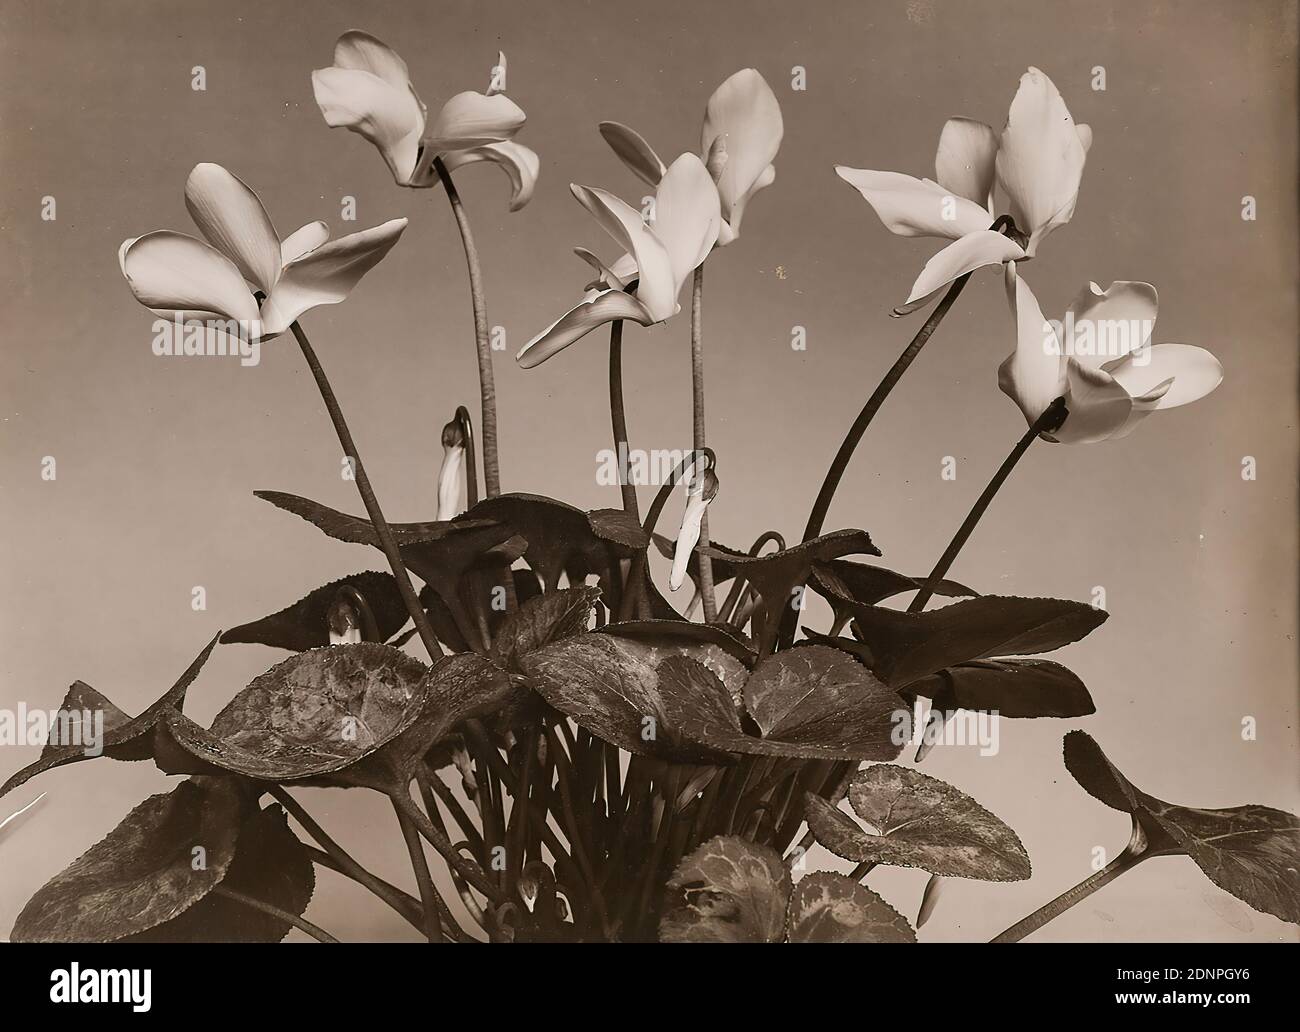 Wilhelm Weimar, cyclamen, silver gelatin paper, black and white positive process, Total: Height: 17,20 cm; Width: 23,40 cm, in lead: III03, photography, flowers Stock Photo